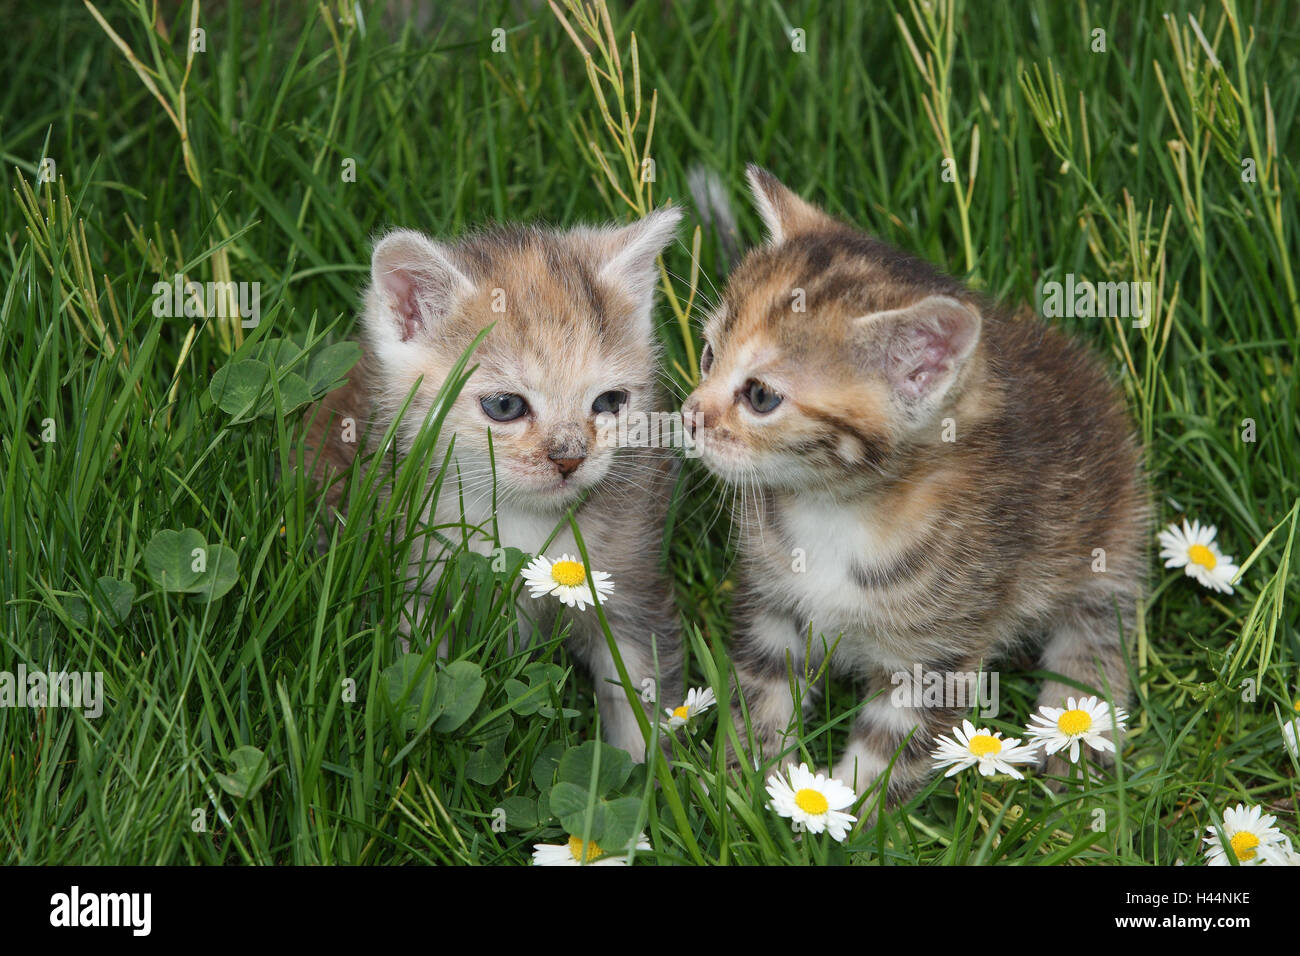 Cats, young, sit, meadow, garden, animals, mammals, pets, small cats, Felidae, domesticates, house cat, young animal, kitten, two, siblings, play, together, small, awkward, clumsy, sweetly, cohesion, suture, togetherness, curiosity, flowers, plants, young animals, animal baby, nature, outside, Stock Photo